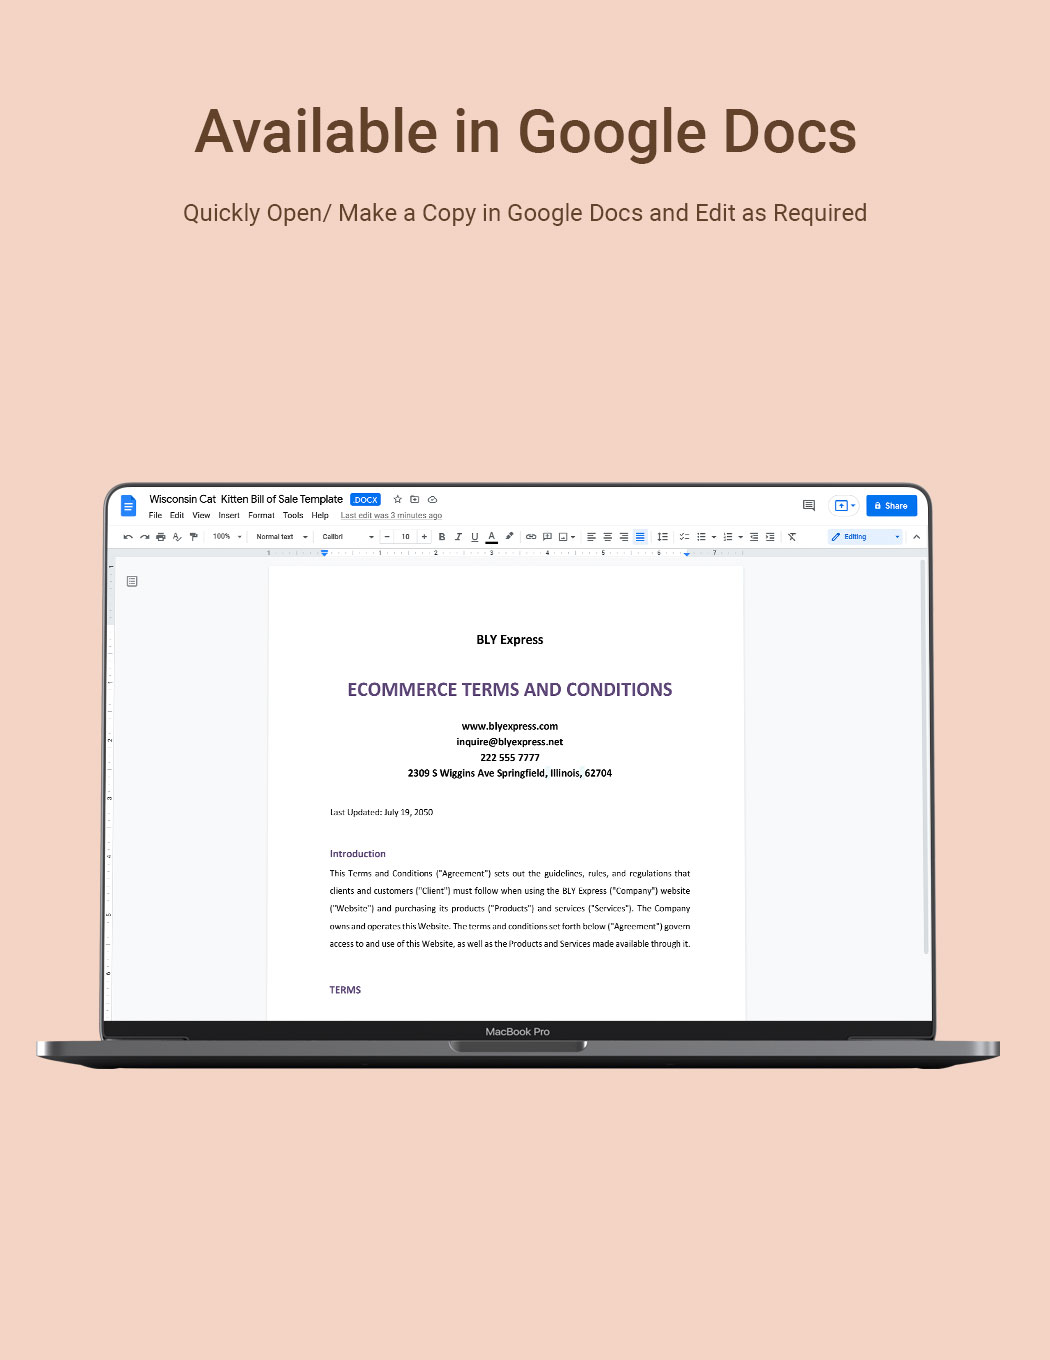 Website Terms And Conditions Template